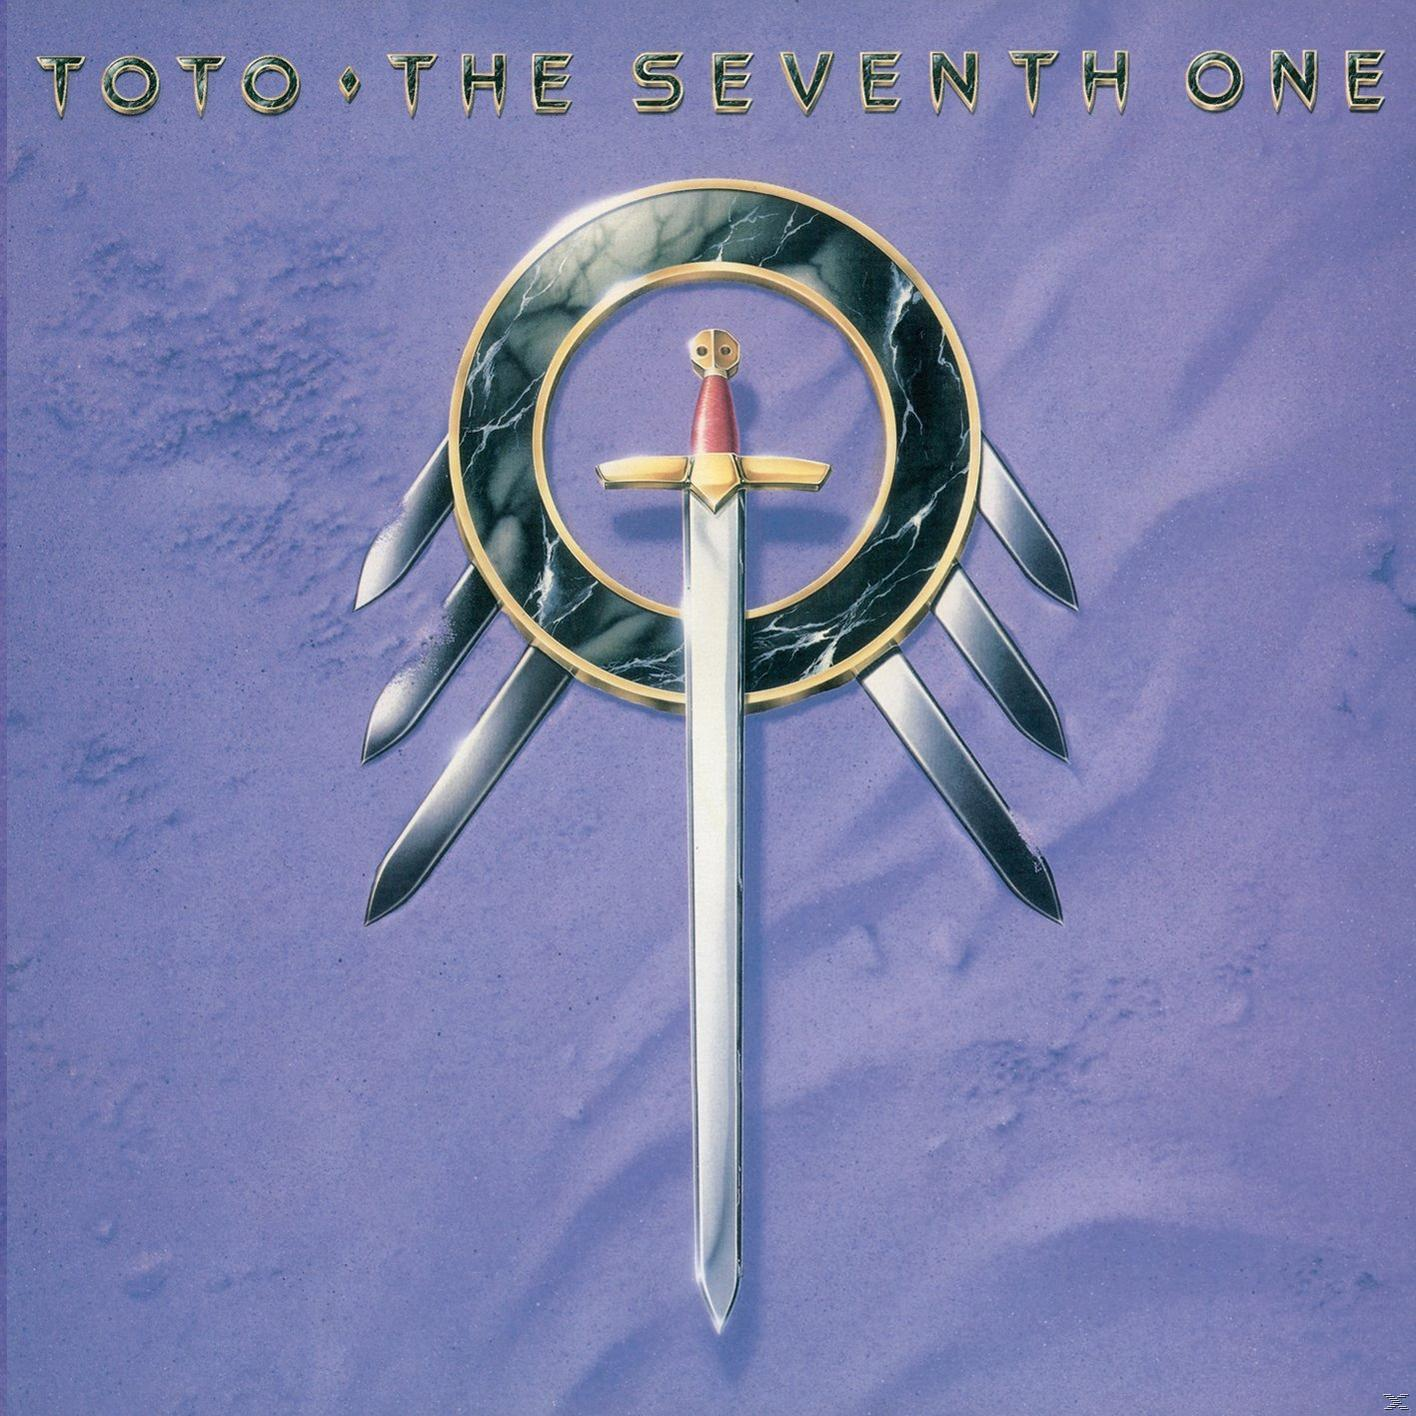 Toto - The Seventh One - Edition) (CD) (Limited Collectors